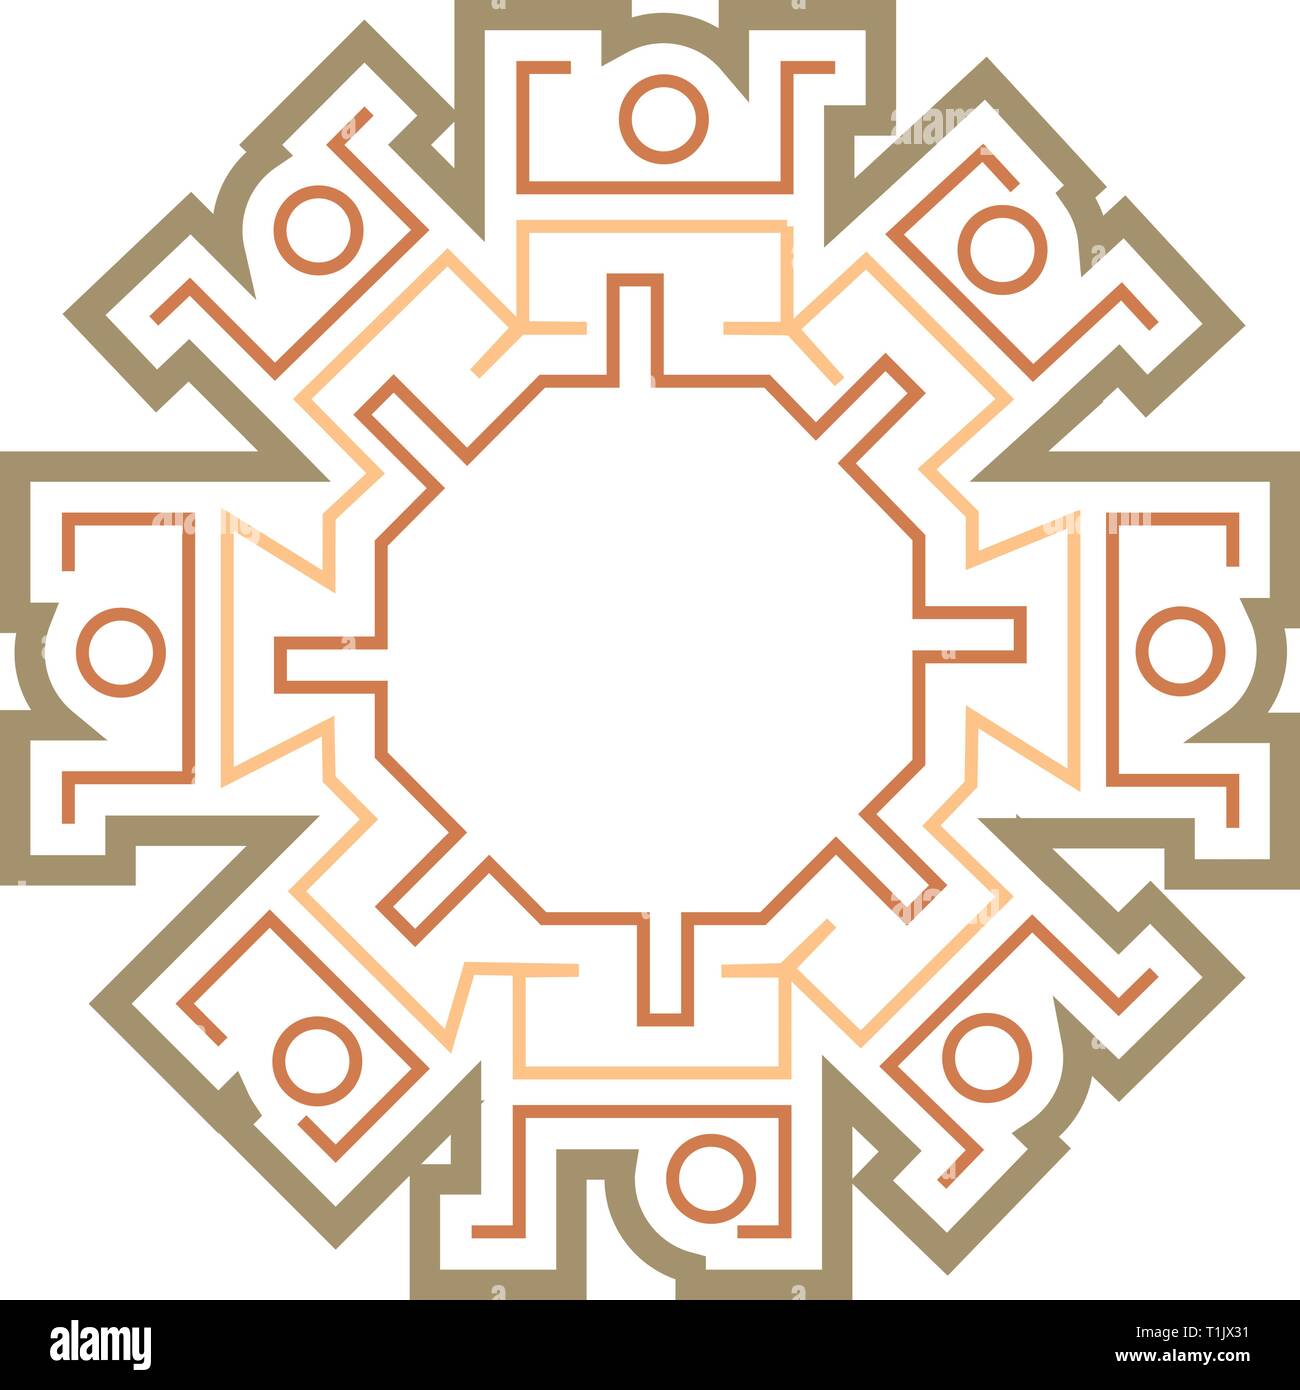 South American design Mayan style graphic hieroglyphic  of people in a circle in various poses & positions. Stock Vector